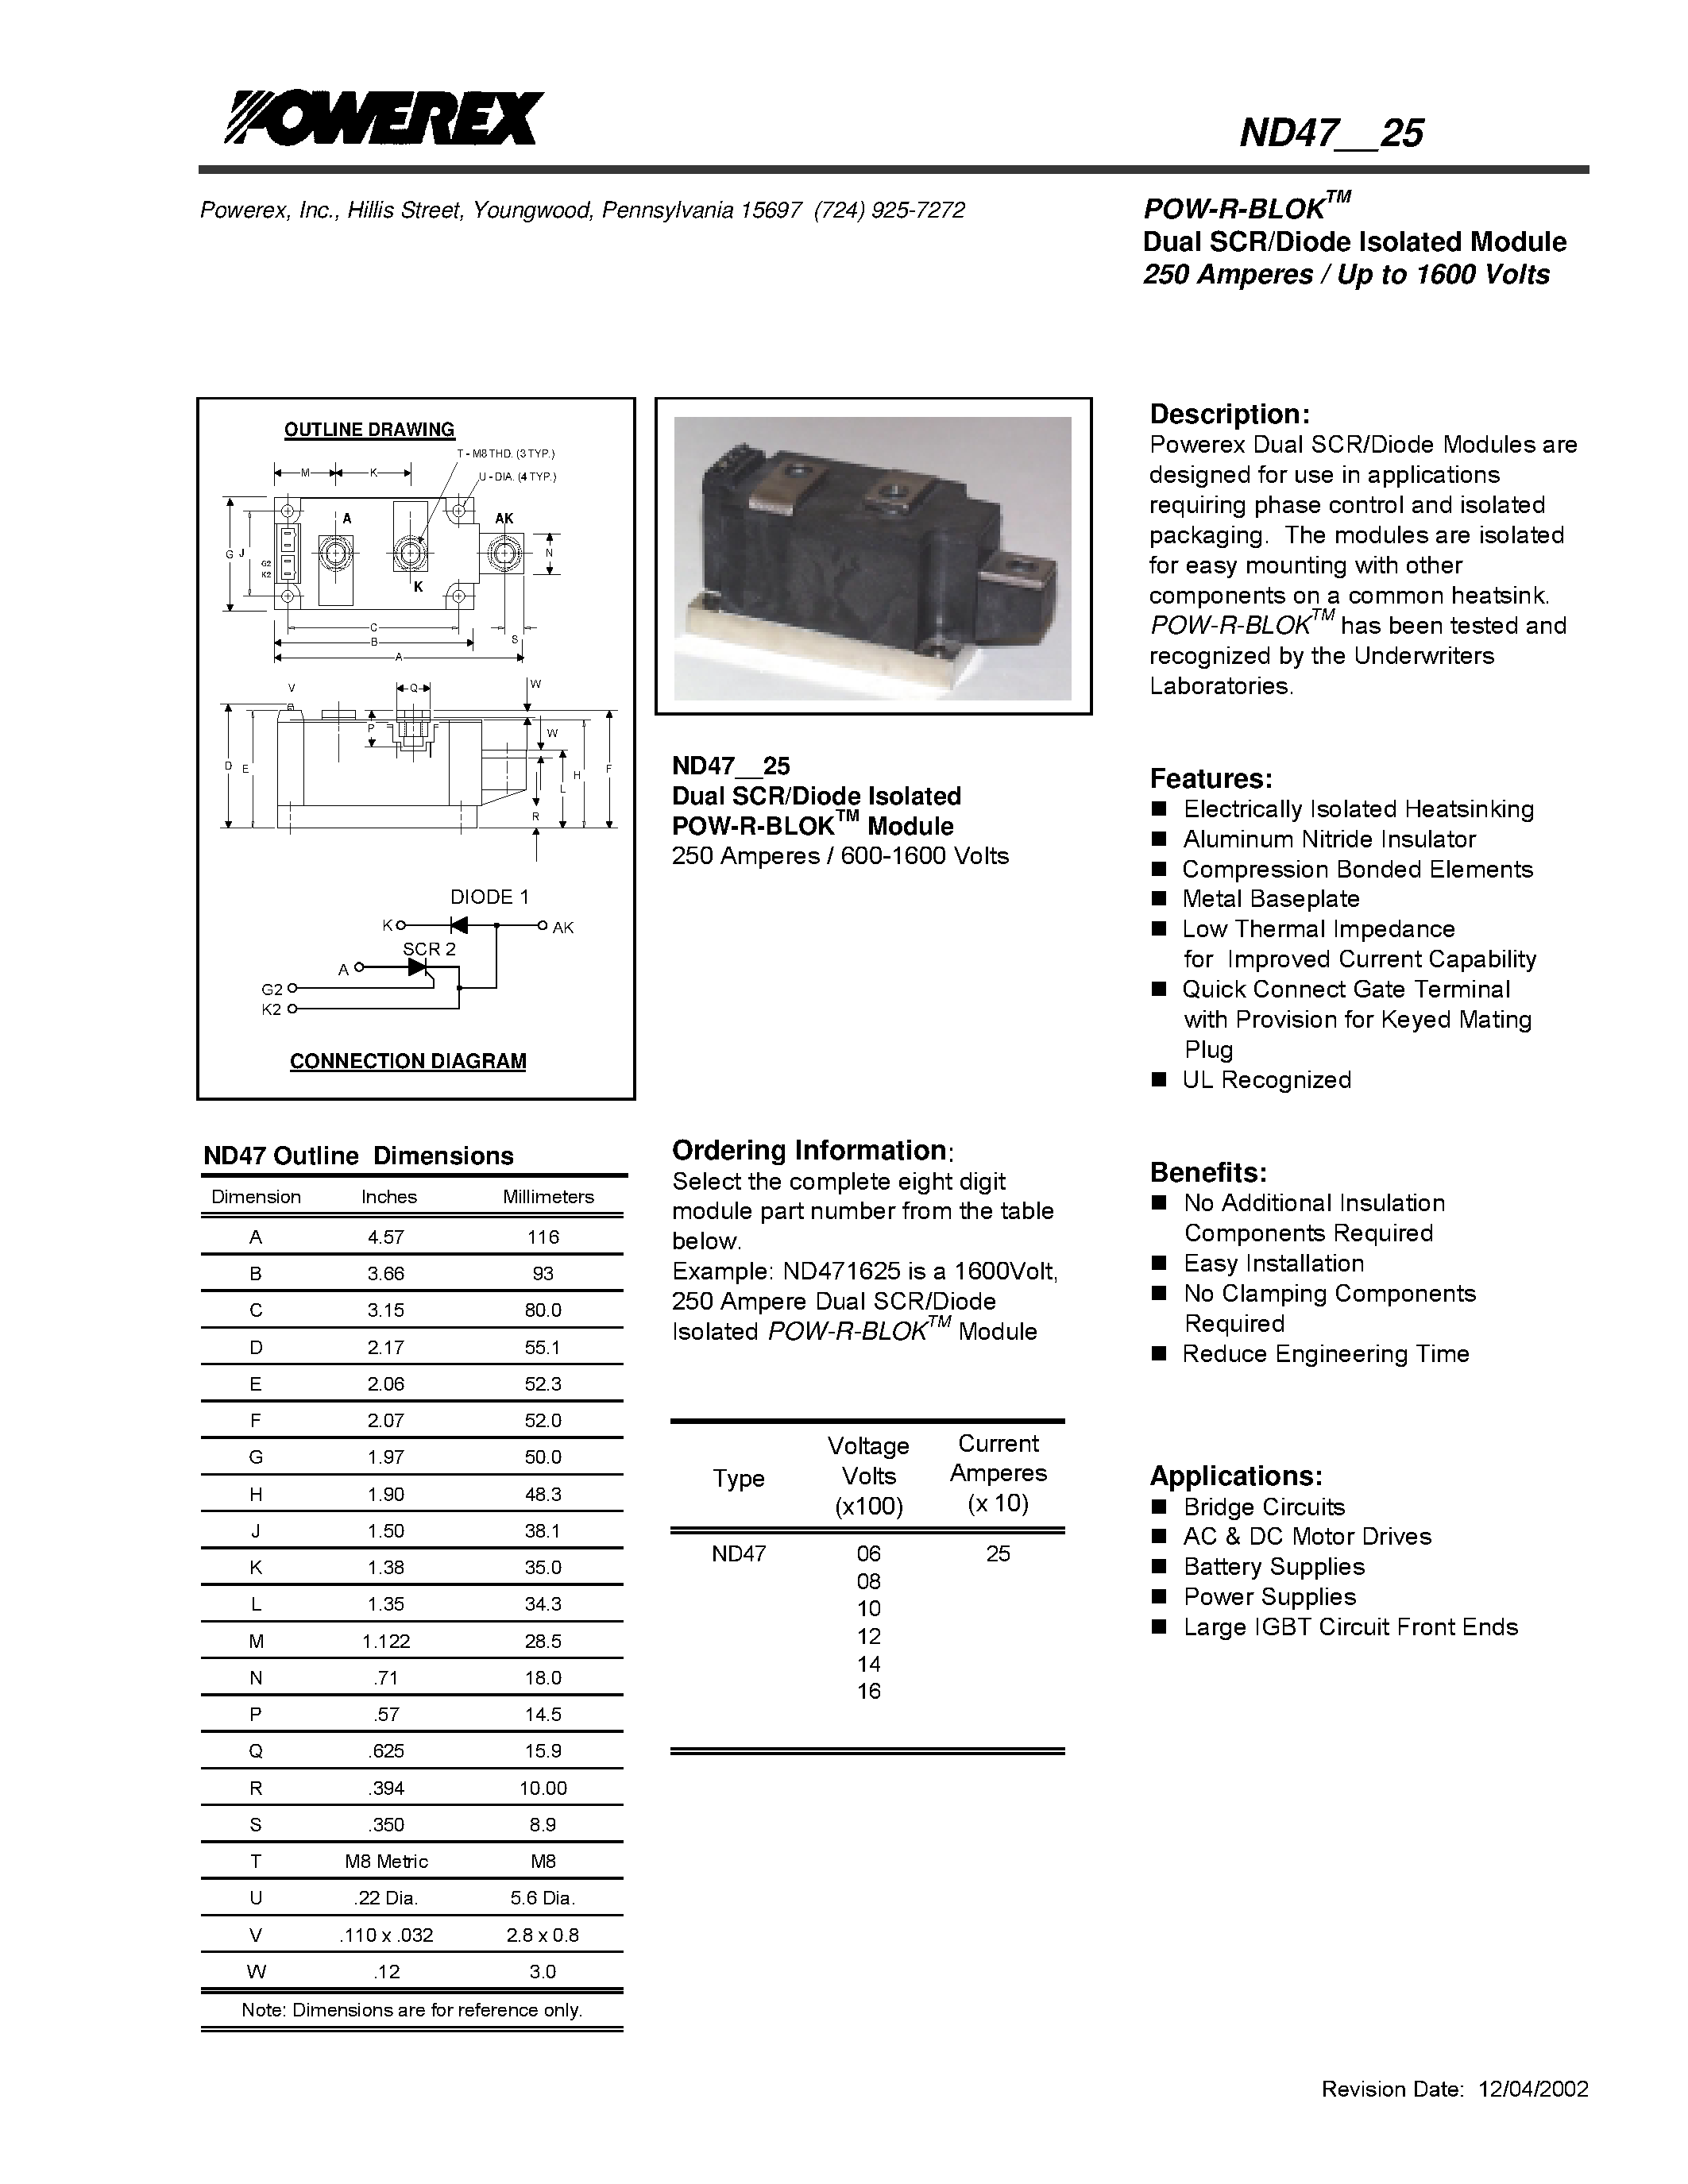 Datasheet ND470625 - POW-R-BLOK Dual SCR/Diode Isolated Module (250 Amperes / Up to 1600 Volts) page 1